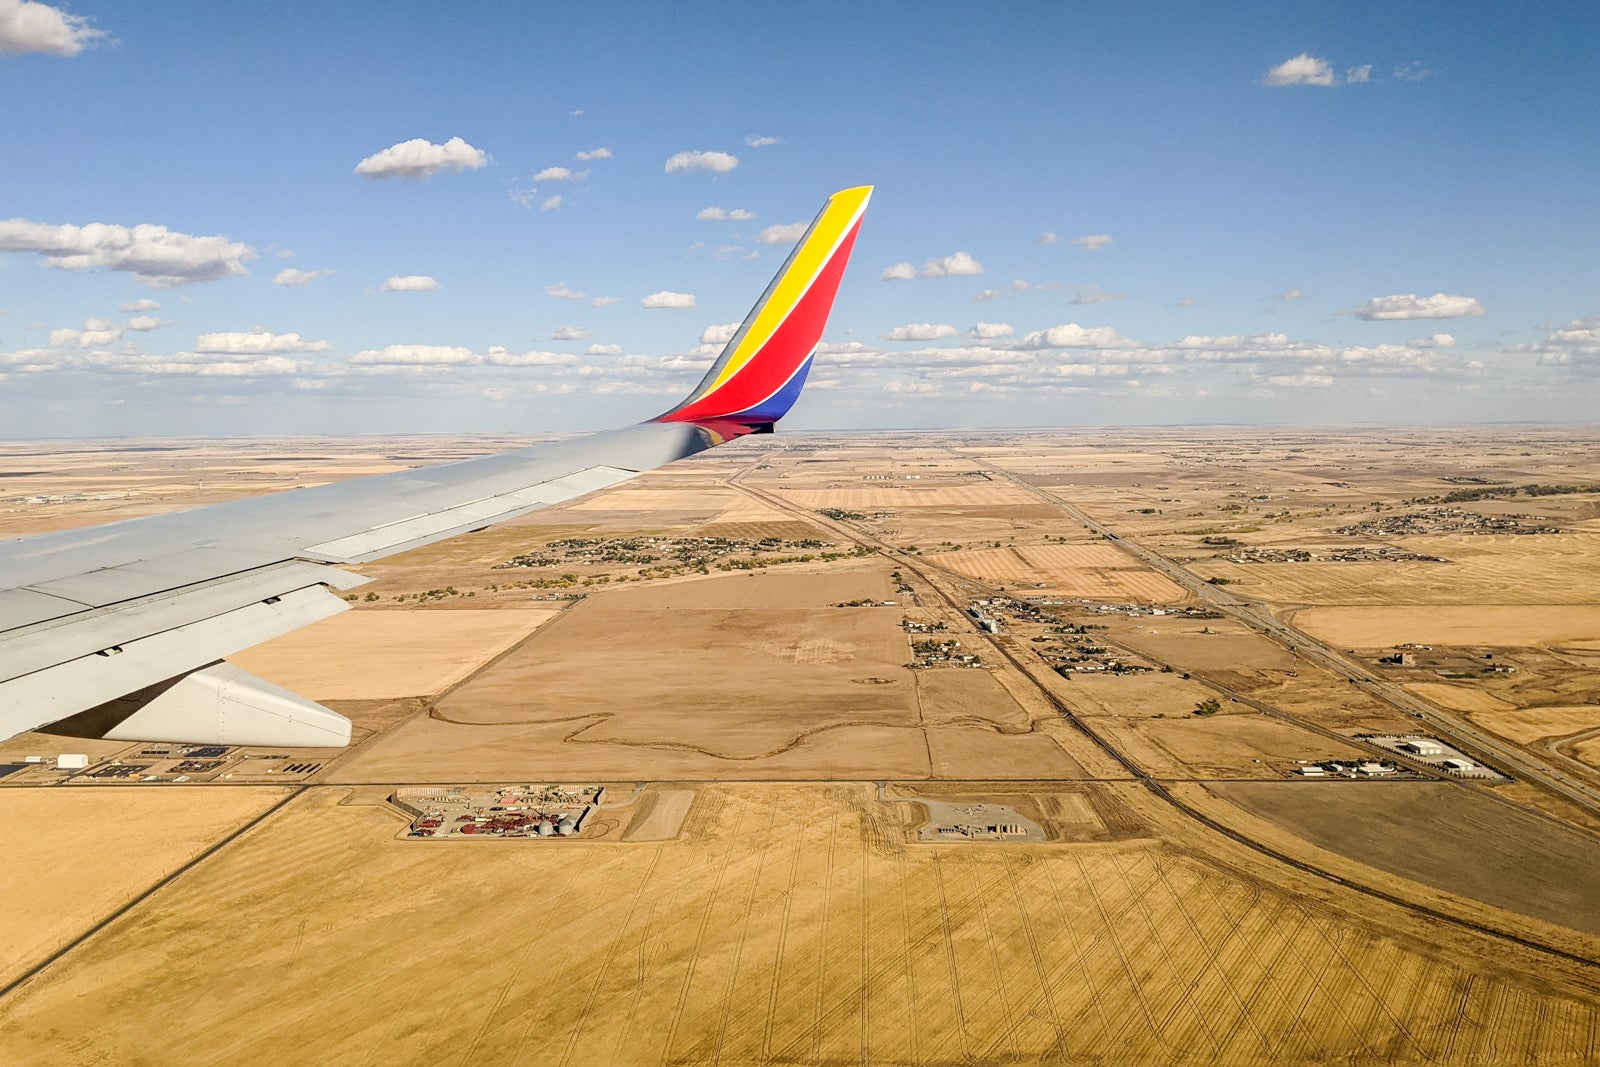 View from a Southwest plane